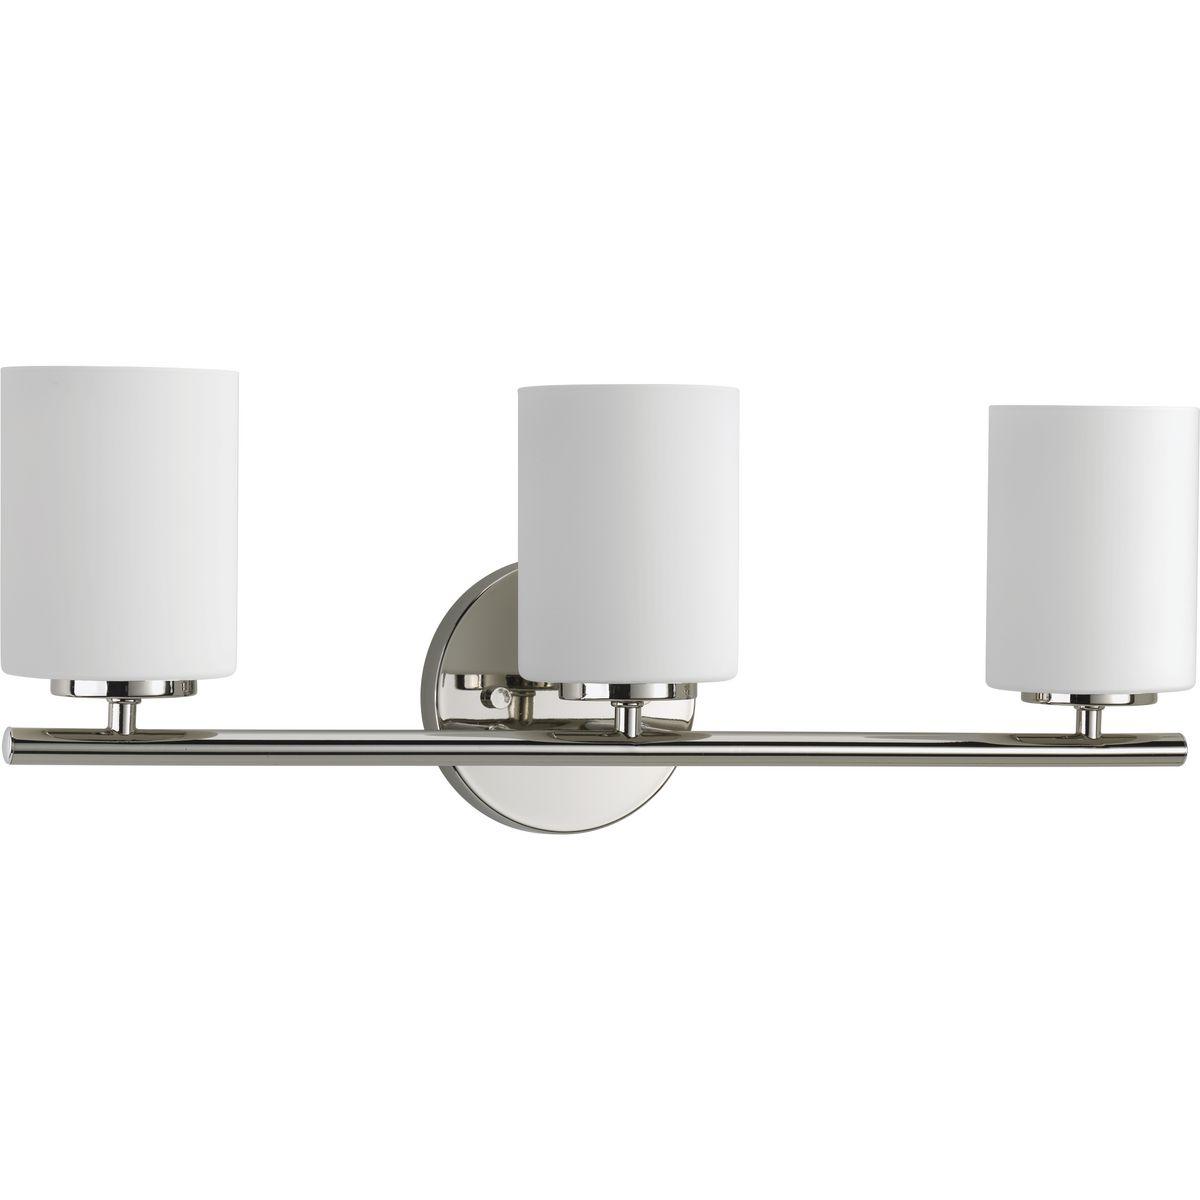 Hubbell P2159-104 Three-light bath & vanity from the Replay Collection, smooth forms, linear details and a pleasingly elegant frame enhance a simplified modern look. Fixture can be mounted up or down. Polished Nickel finish.  ; Ideal for a bathroom ; Perfect for modern and